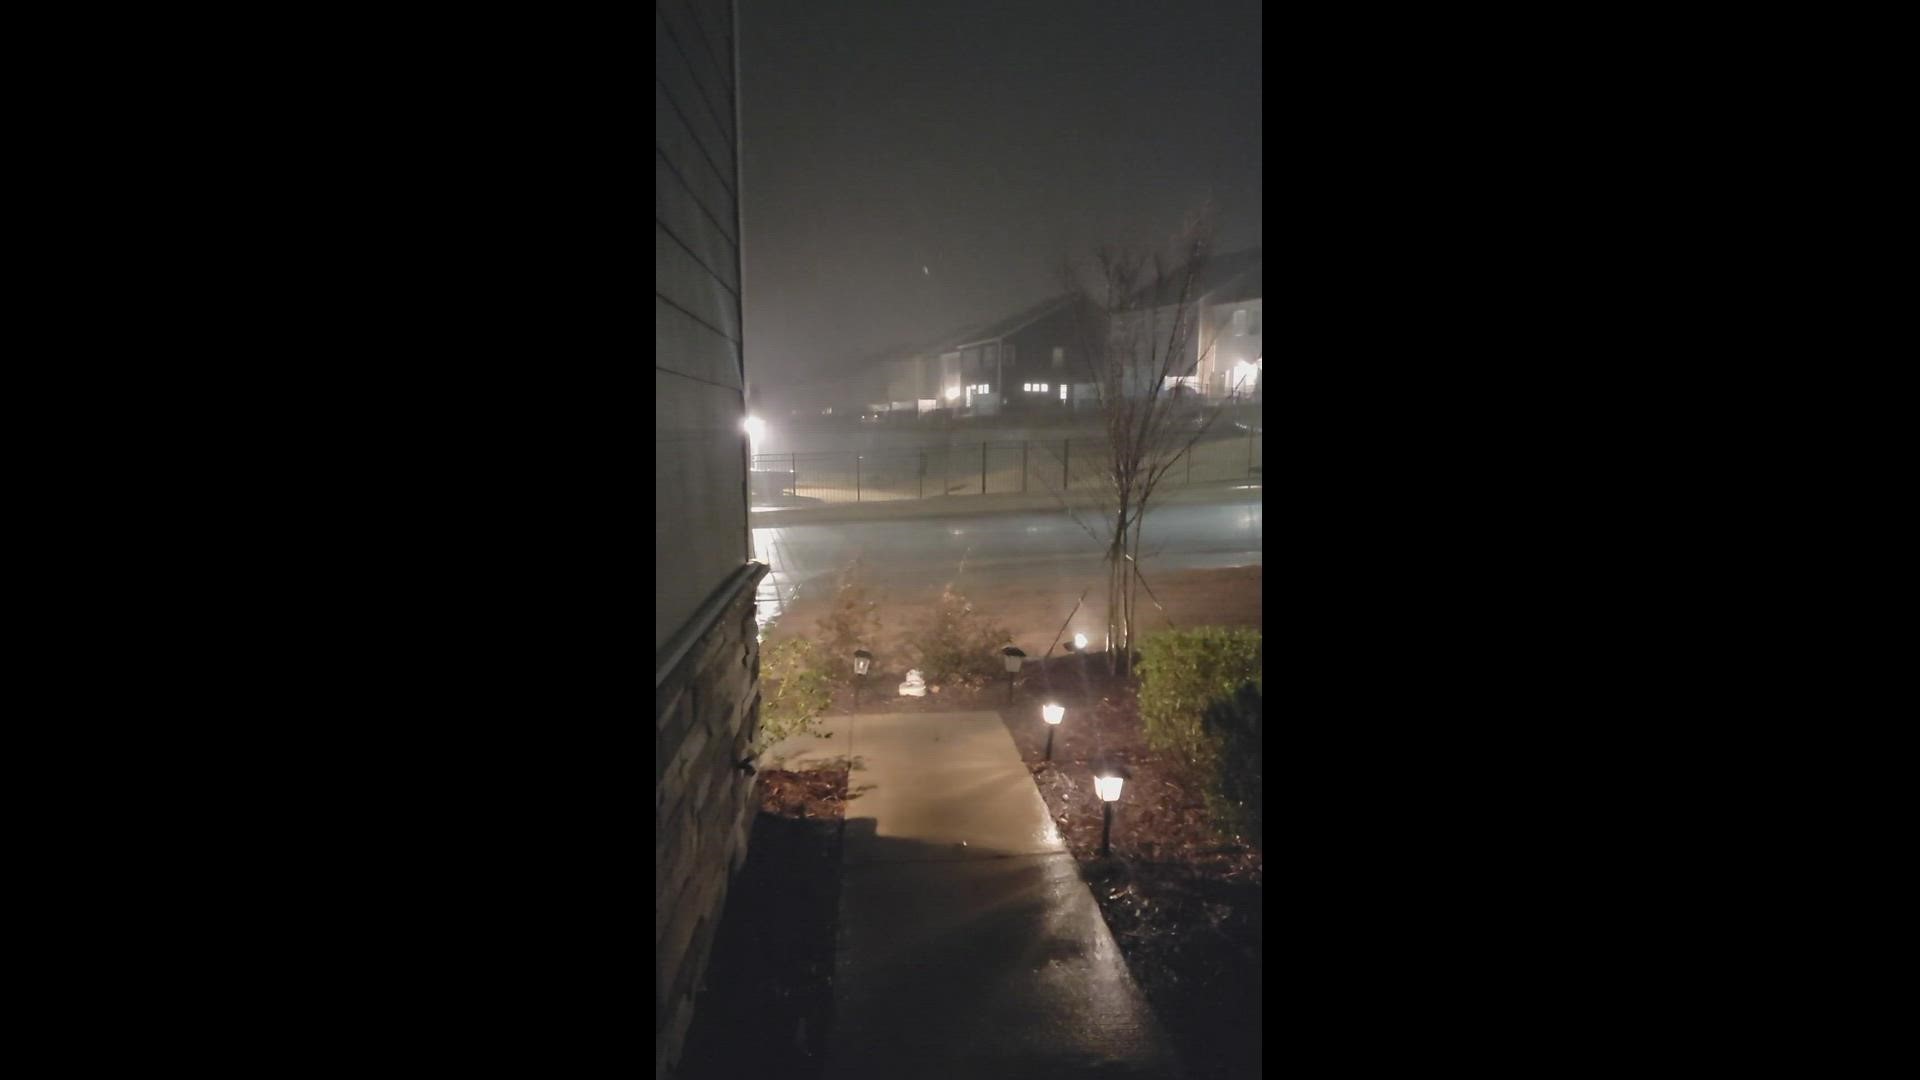 Heavy wind and rain in Fort Mill, SC
Credit: WCNC Charlotte viewer Jorge